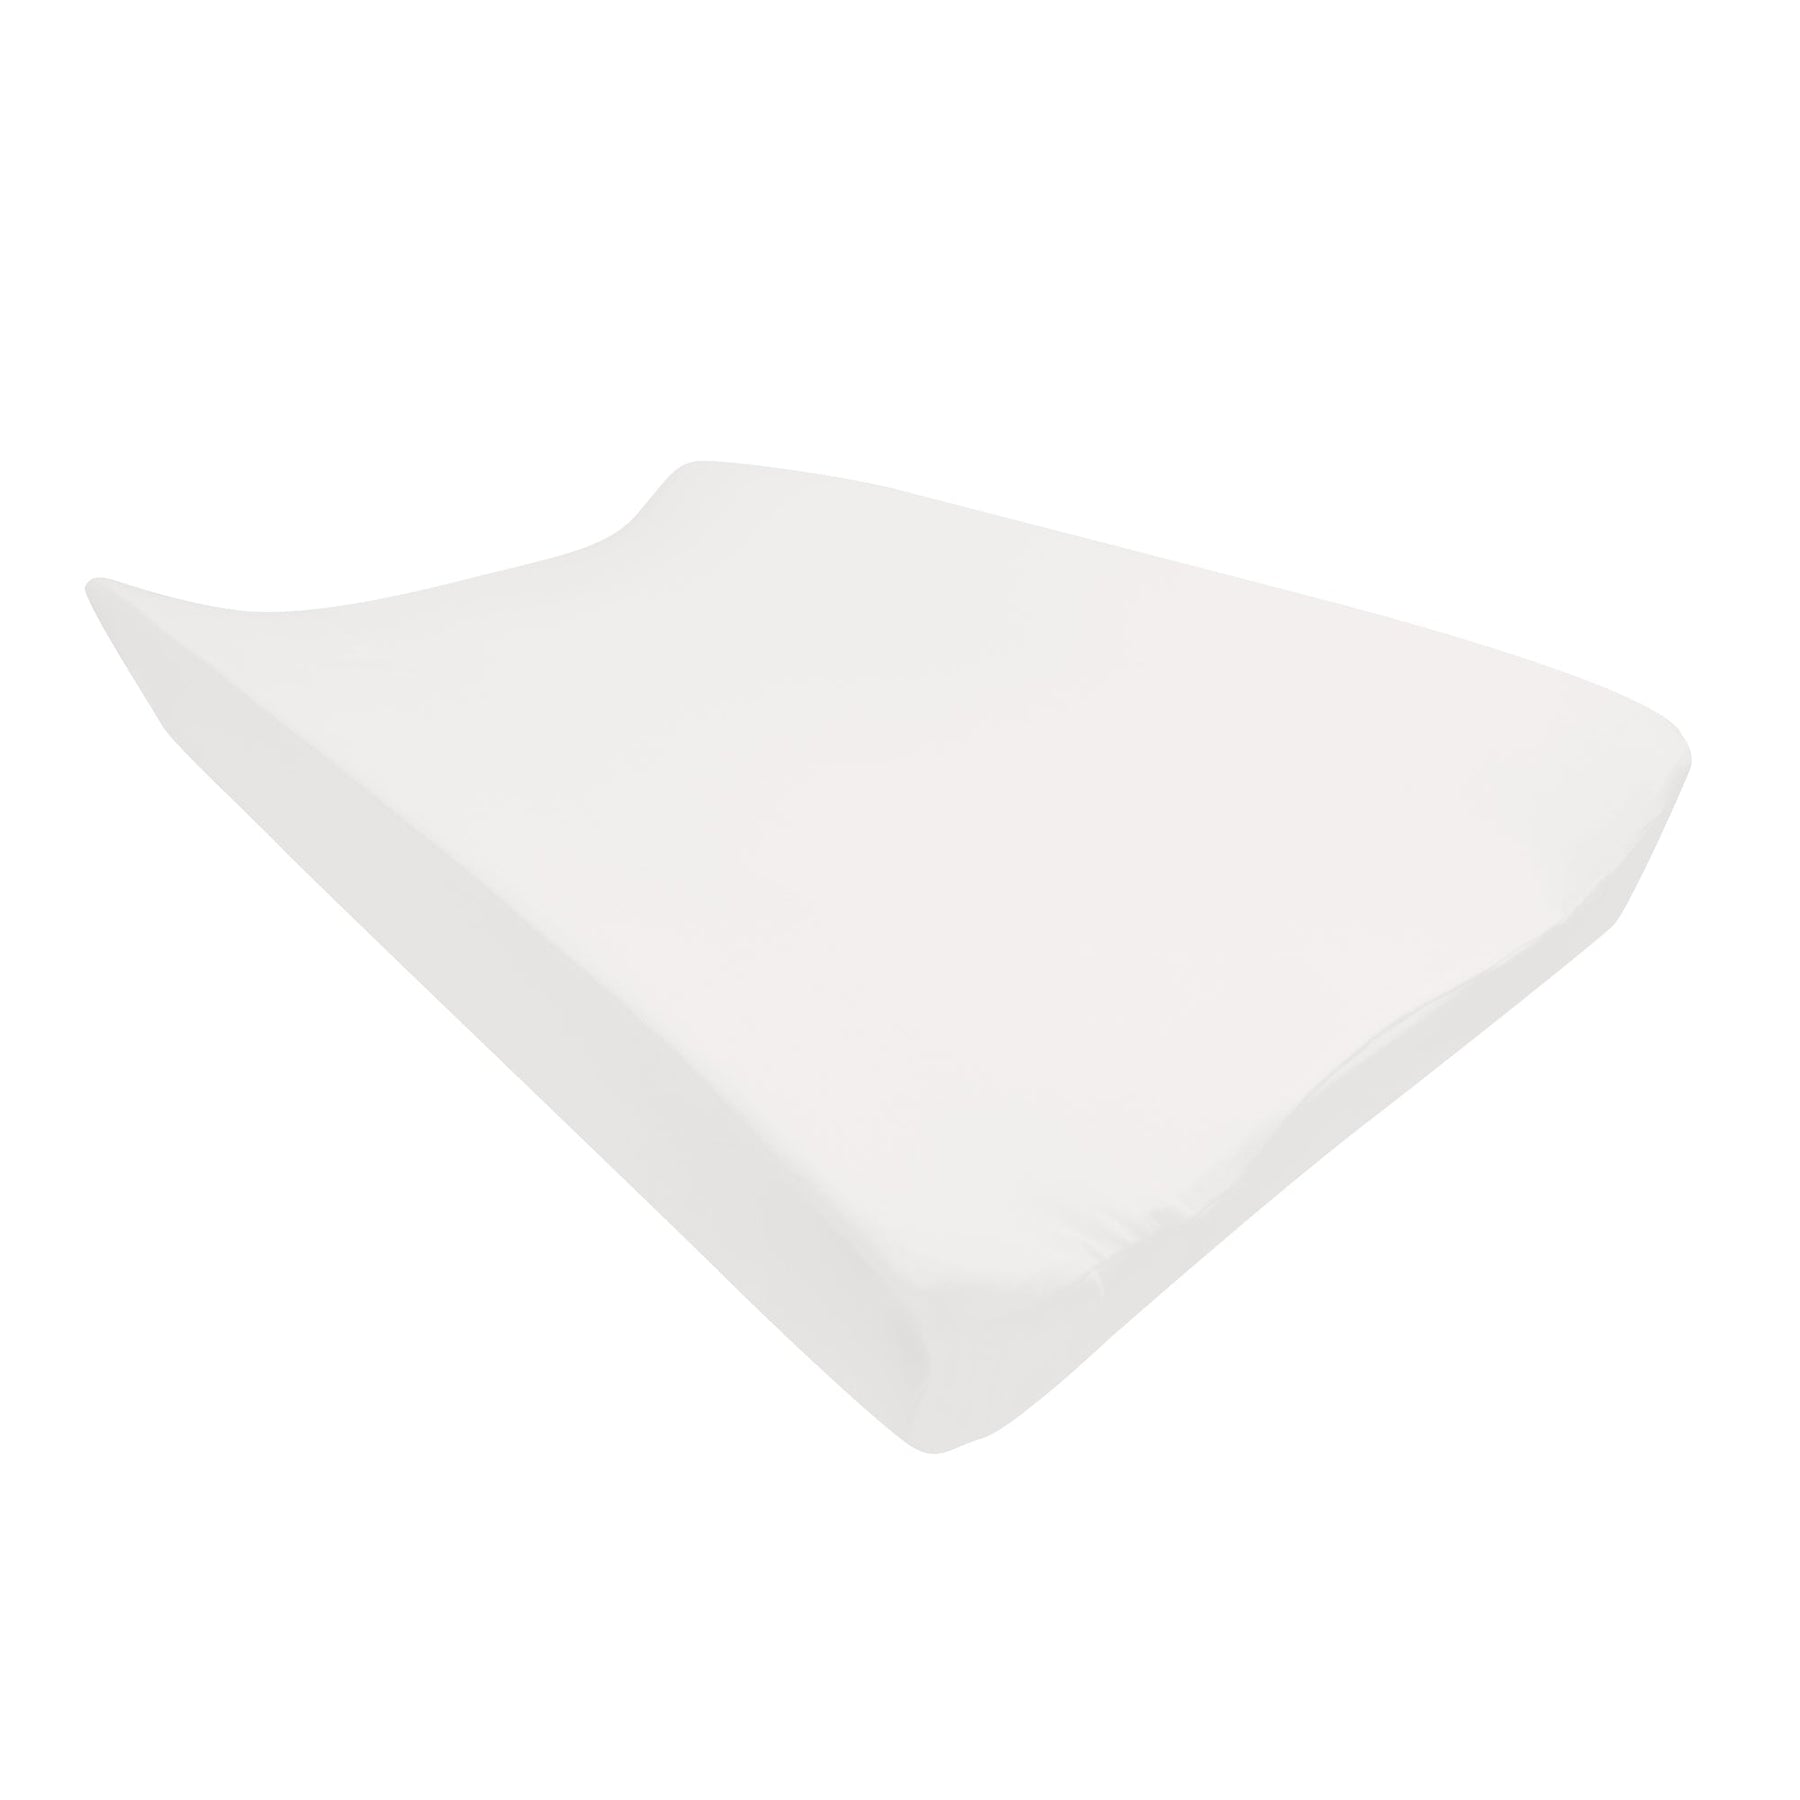 Kyte BABY Change Pad Cover Cloud / One Size Change Pad Cover in Cloud